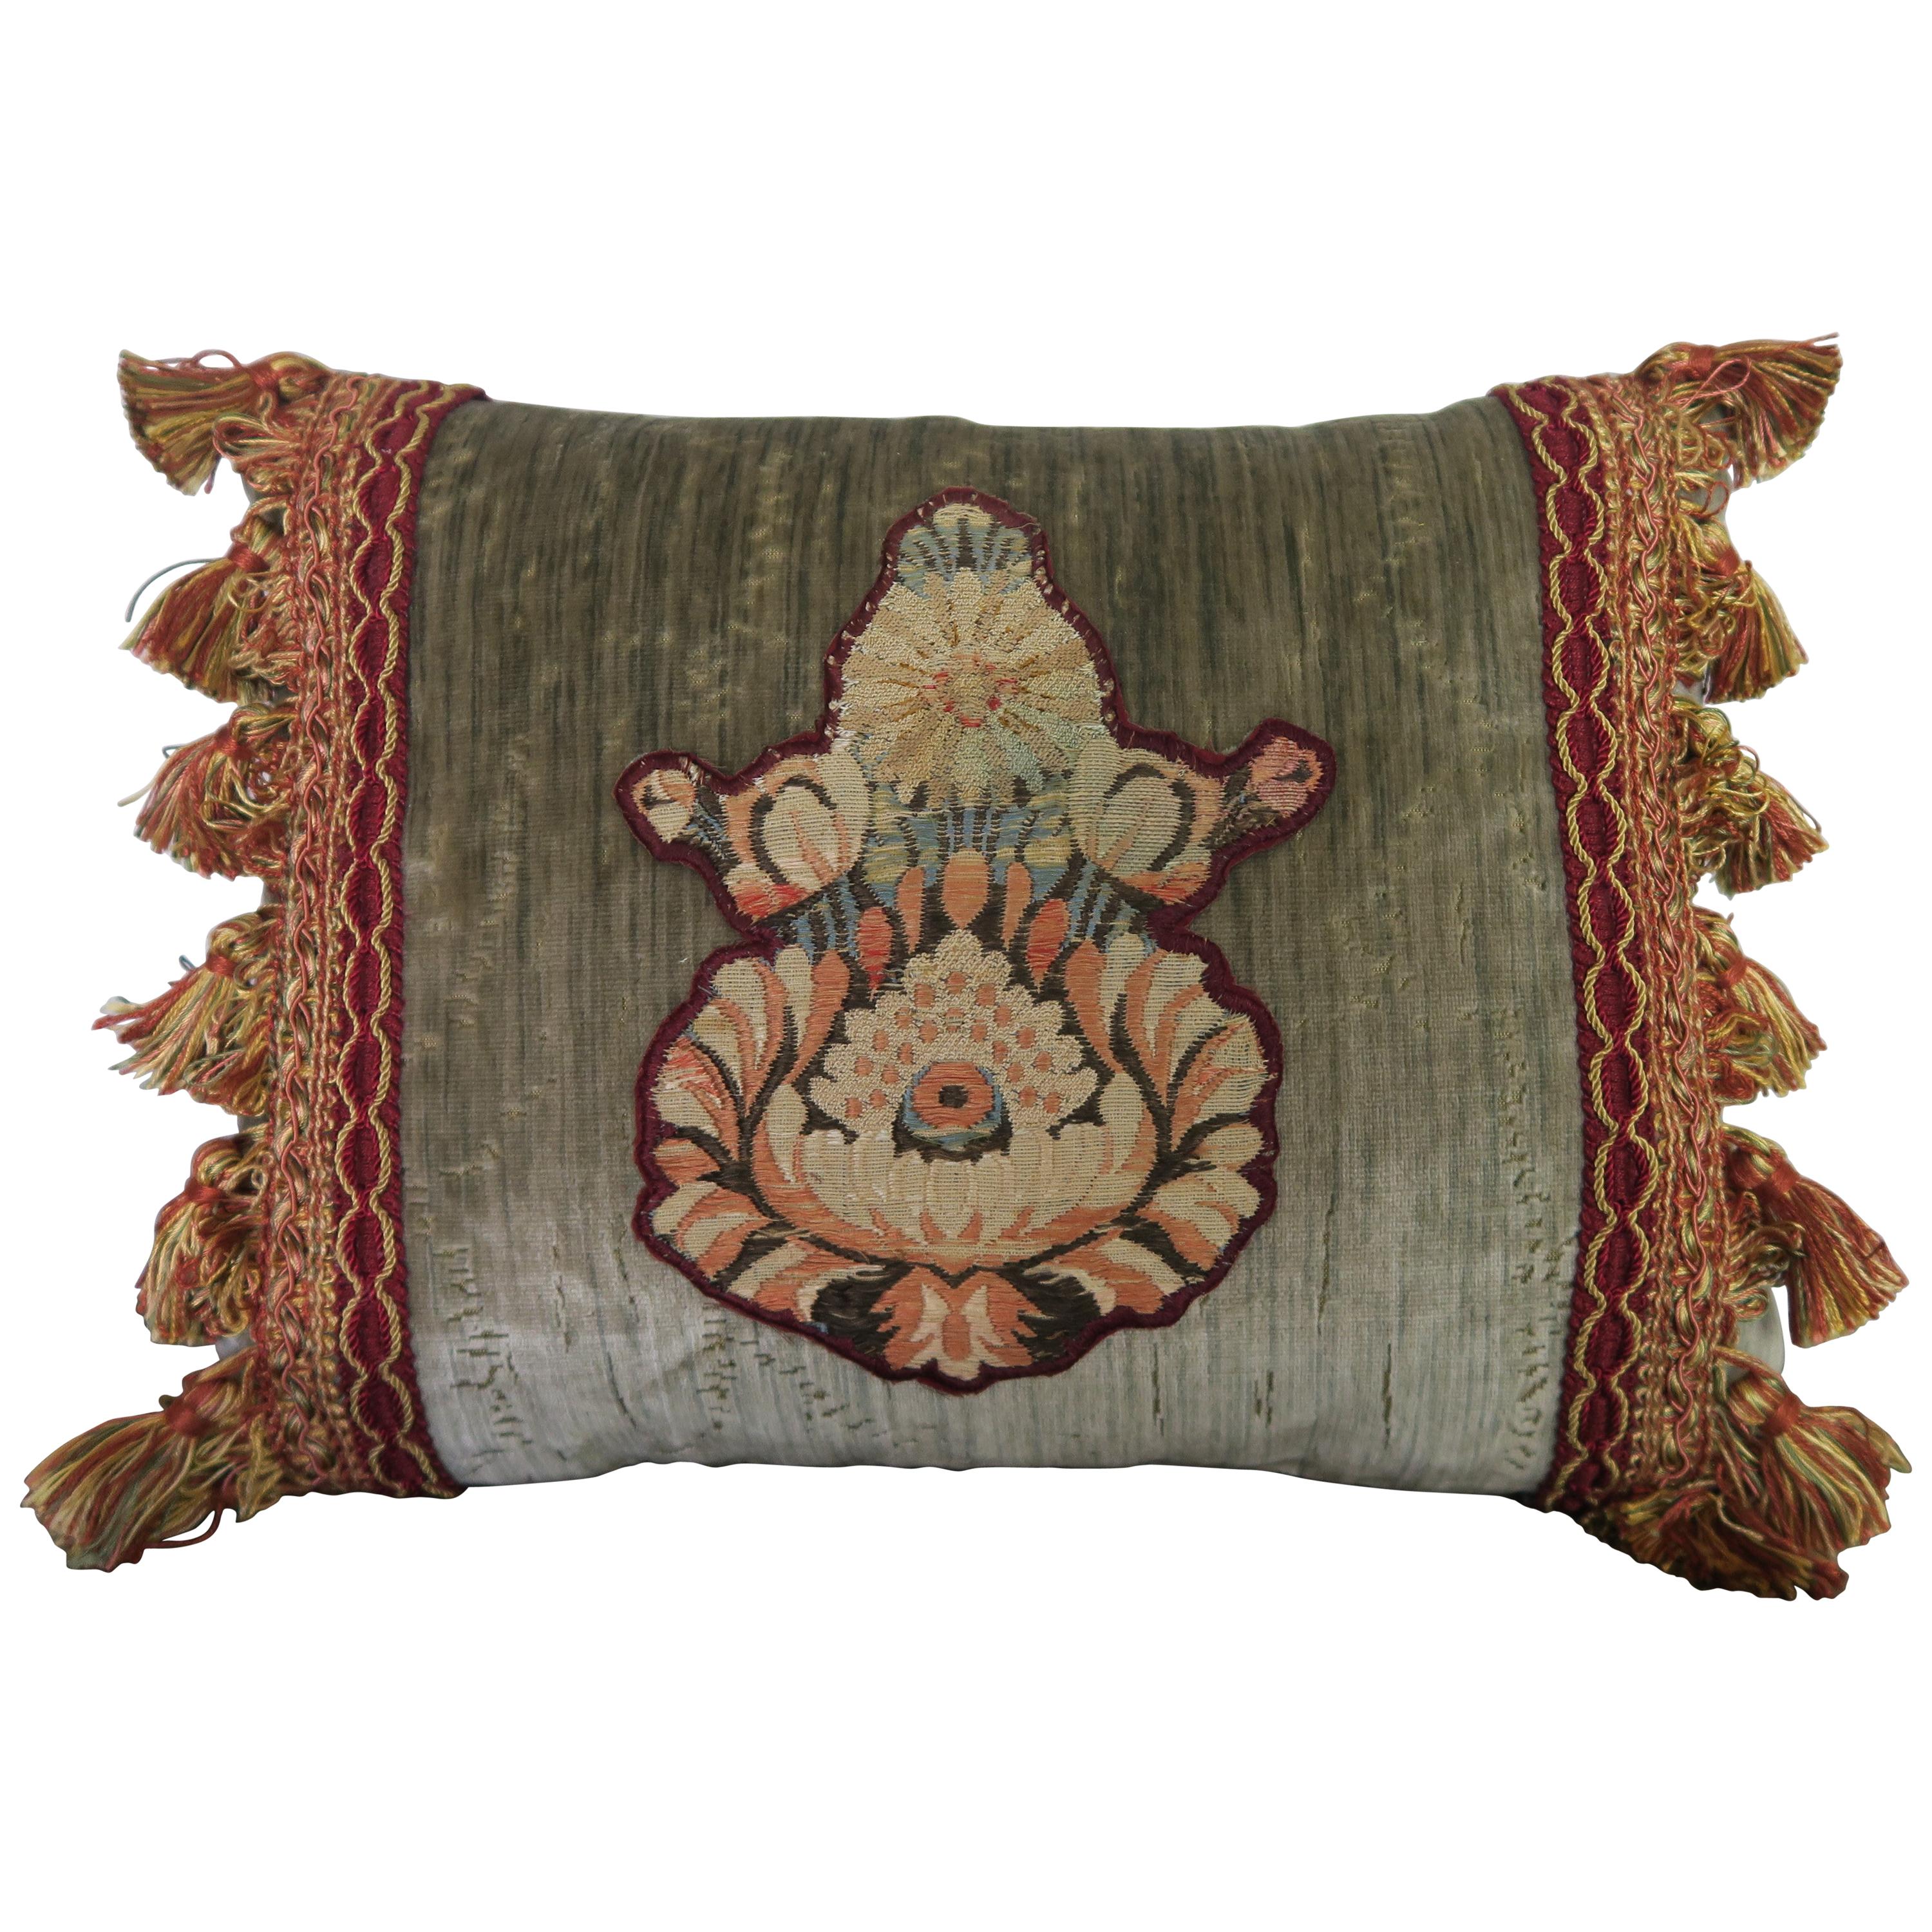 Embroidered Appliqued Velvet Pillow by Melissa Levinson